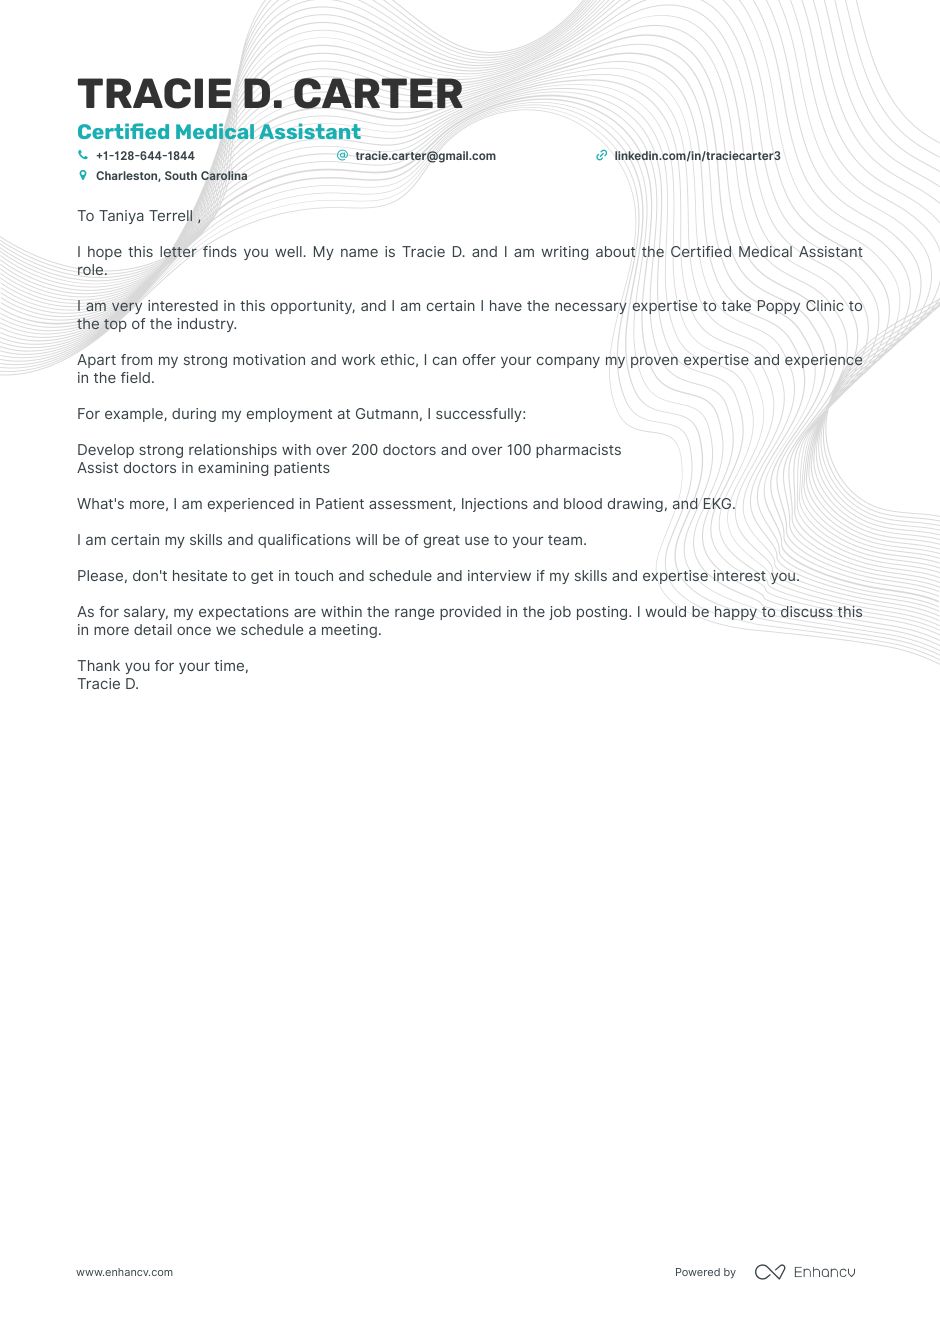 certified-medical-assistant-coverletter.png